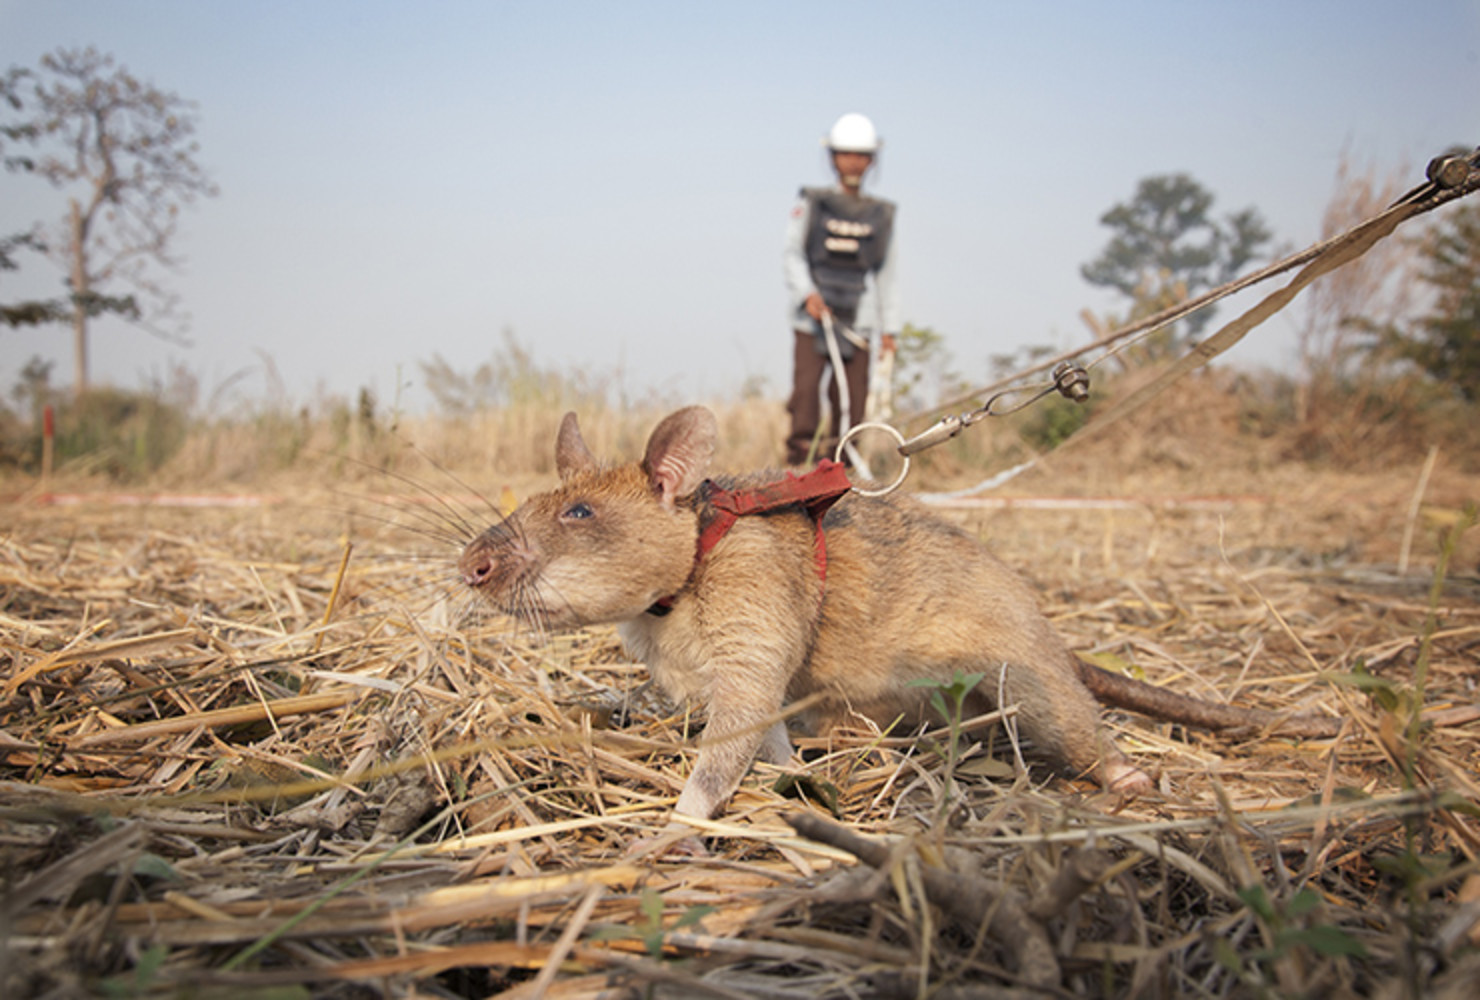 Magawa is a highly trained Mine Detection Rat or MDR for short. Magawa saves lives by using his remarkable sense of smell to safely sniff out explosives faster than existing methods. Cambodia is the world’s second most mined country in the world and Magawa is on a mission to protect local communities.